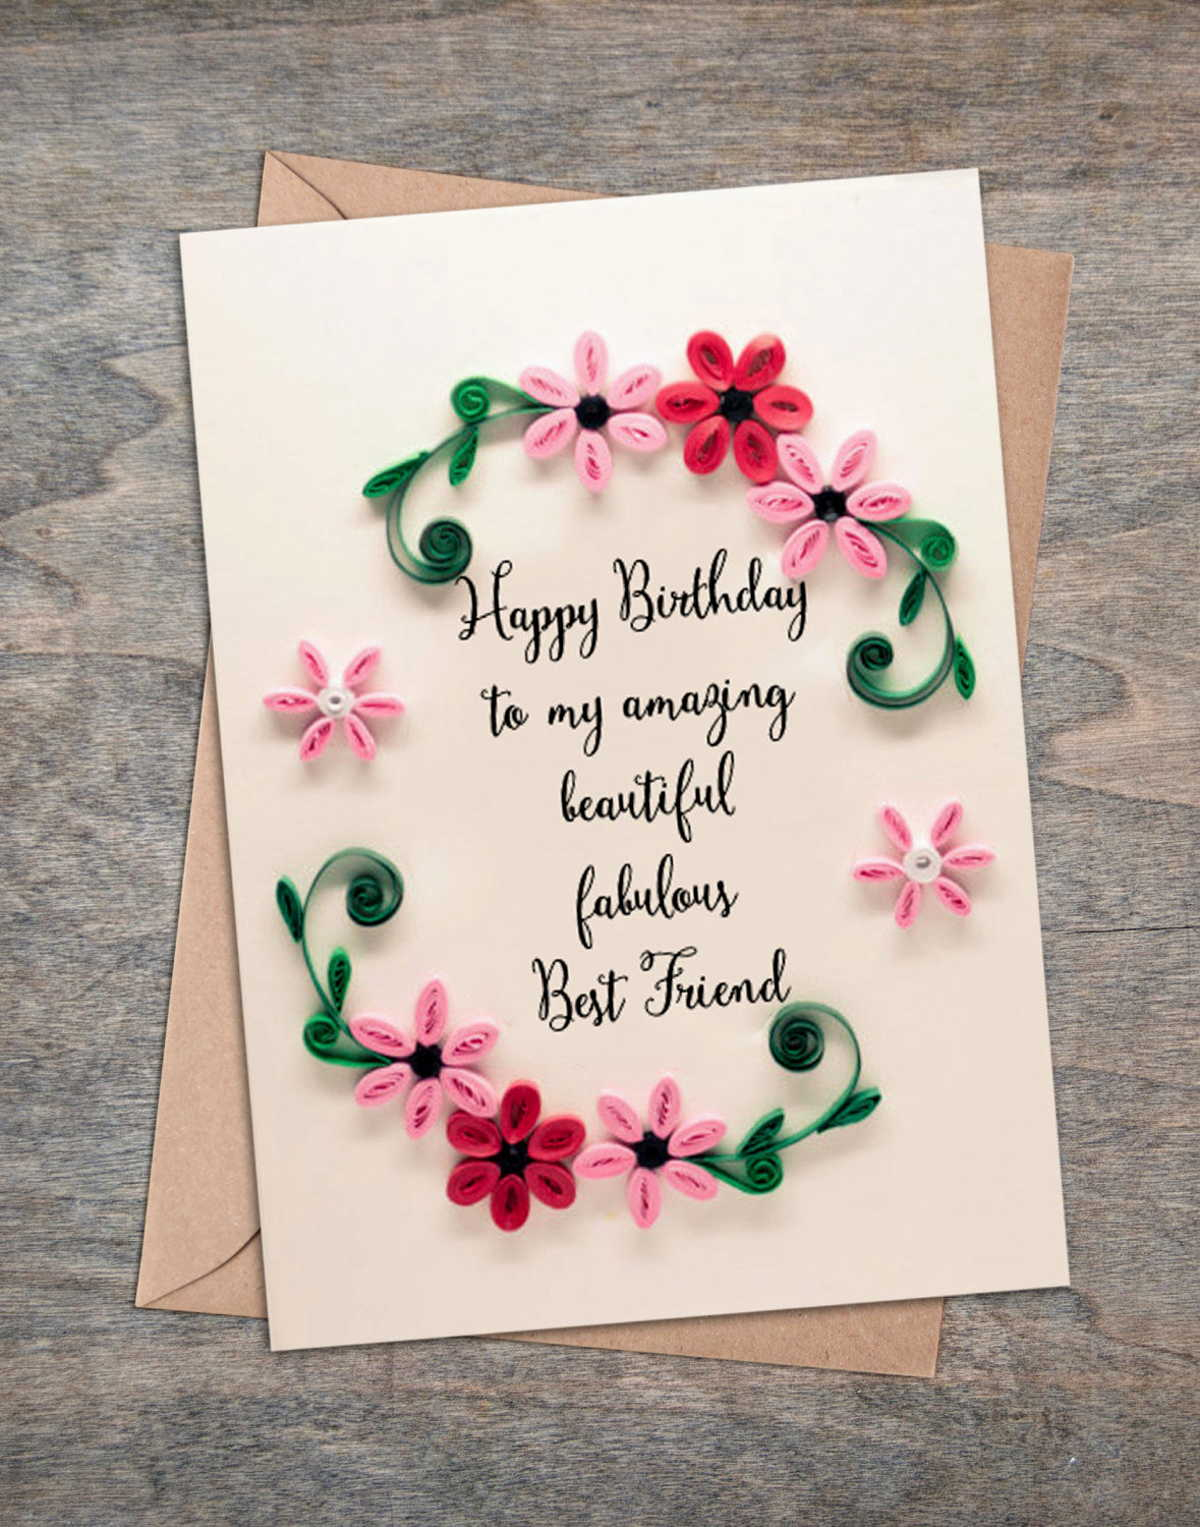 Birthday Card Ideas For Sister Lovely Sister Birthday Card With Quilled Floral Embellishment